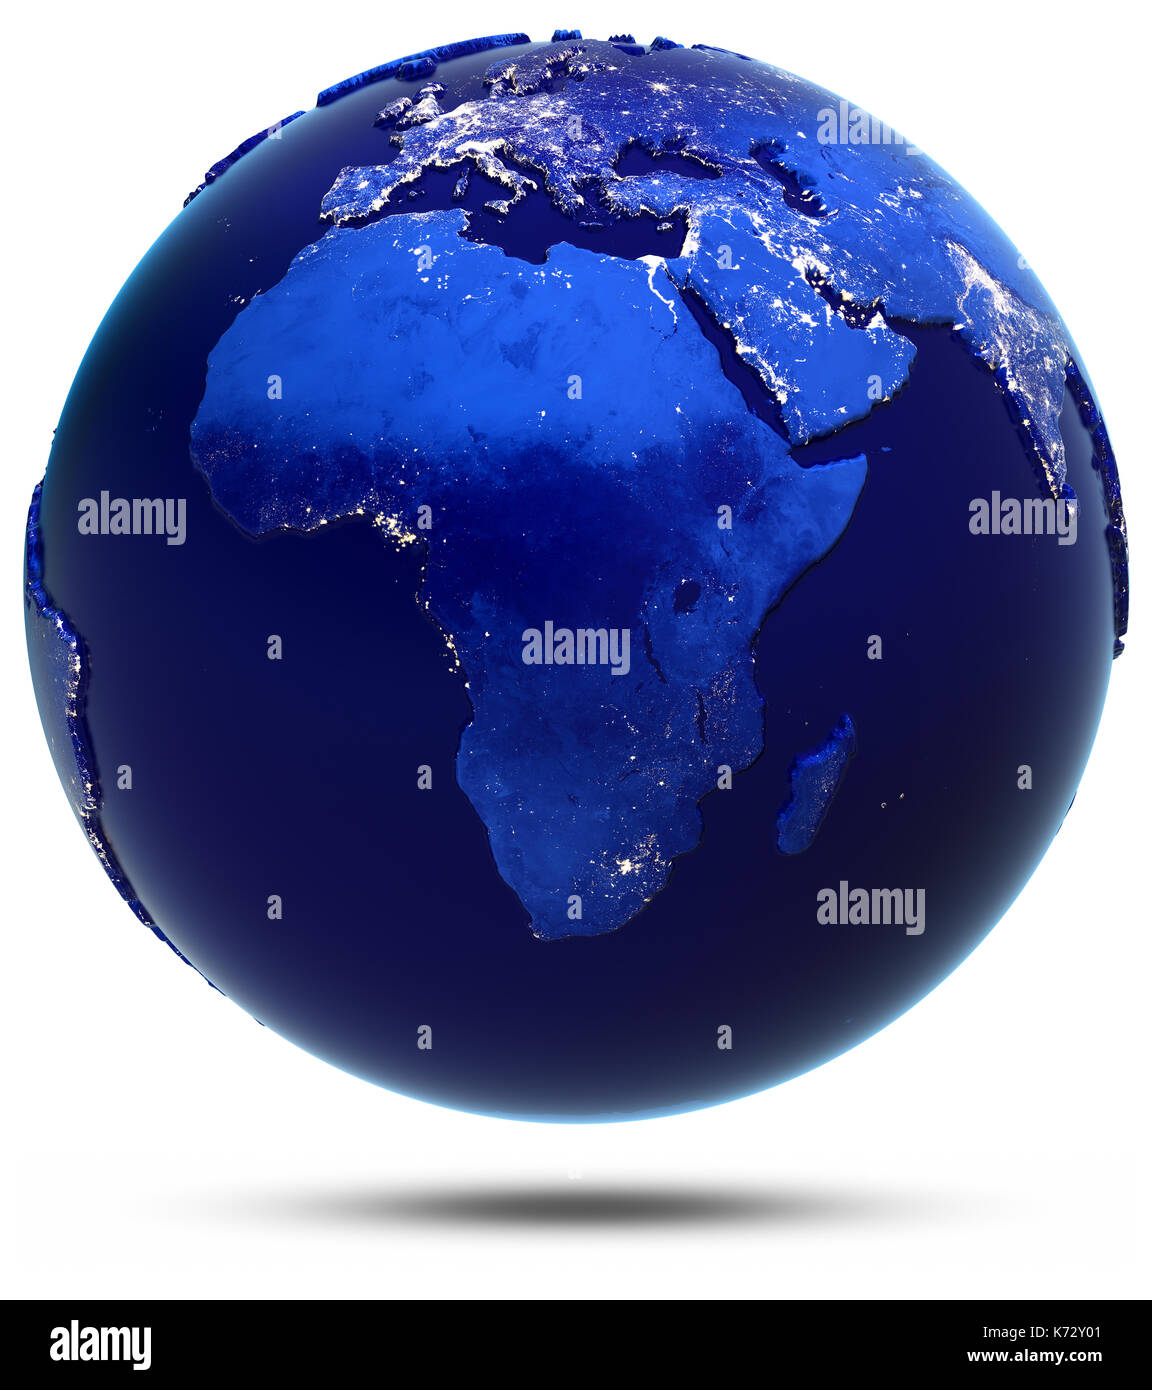 Africa continent and countries 3d rendering Stock Photo